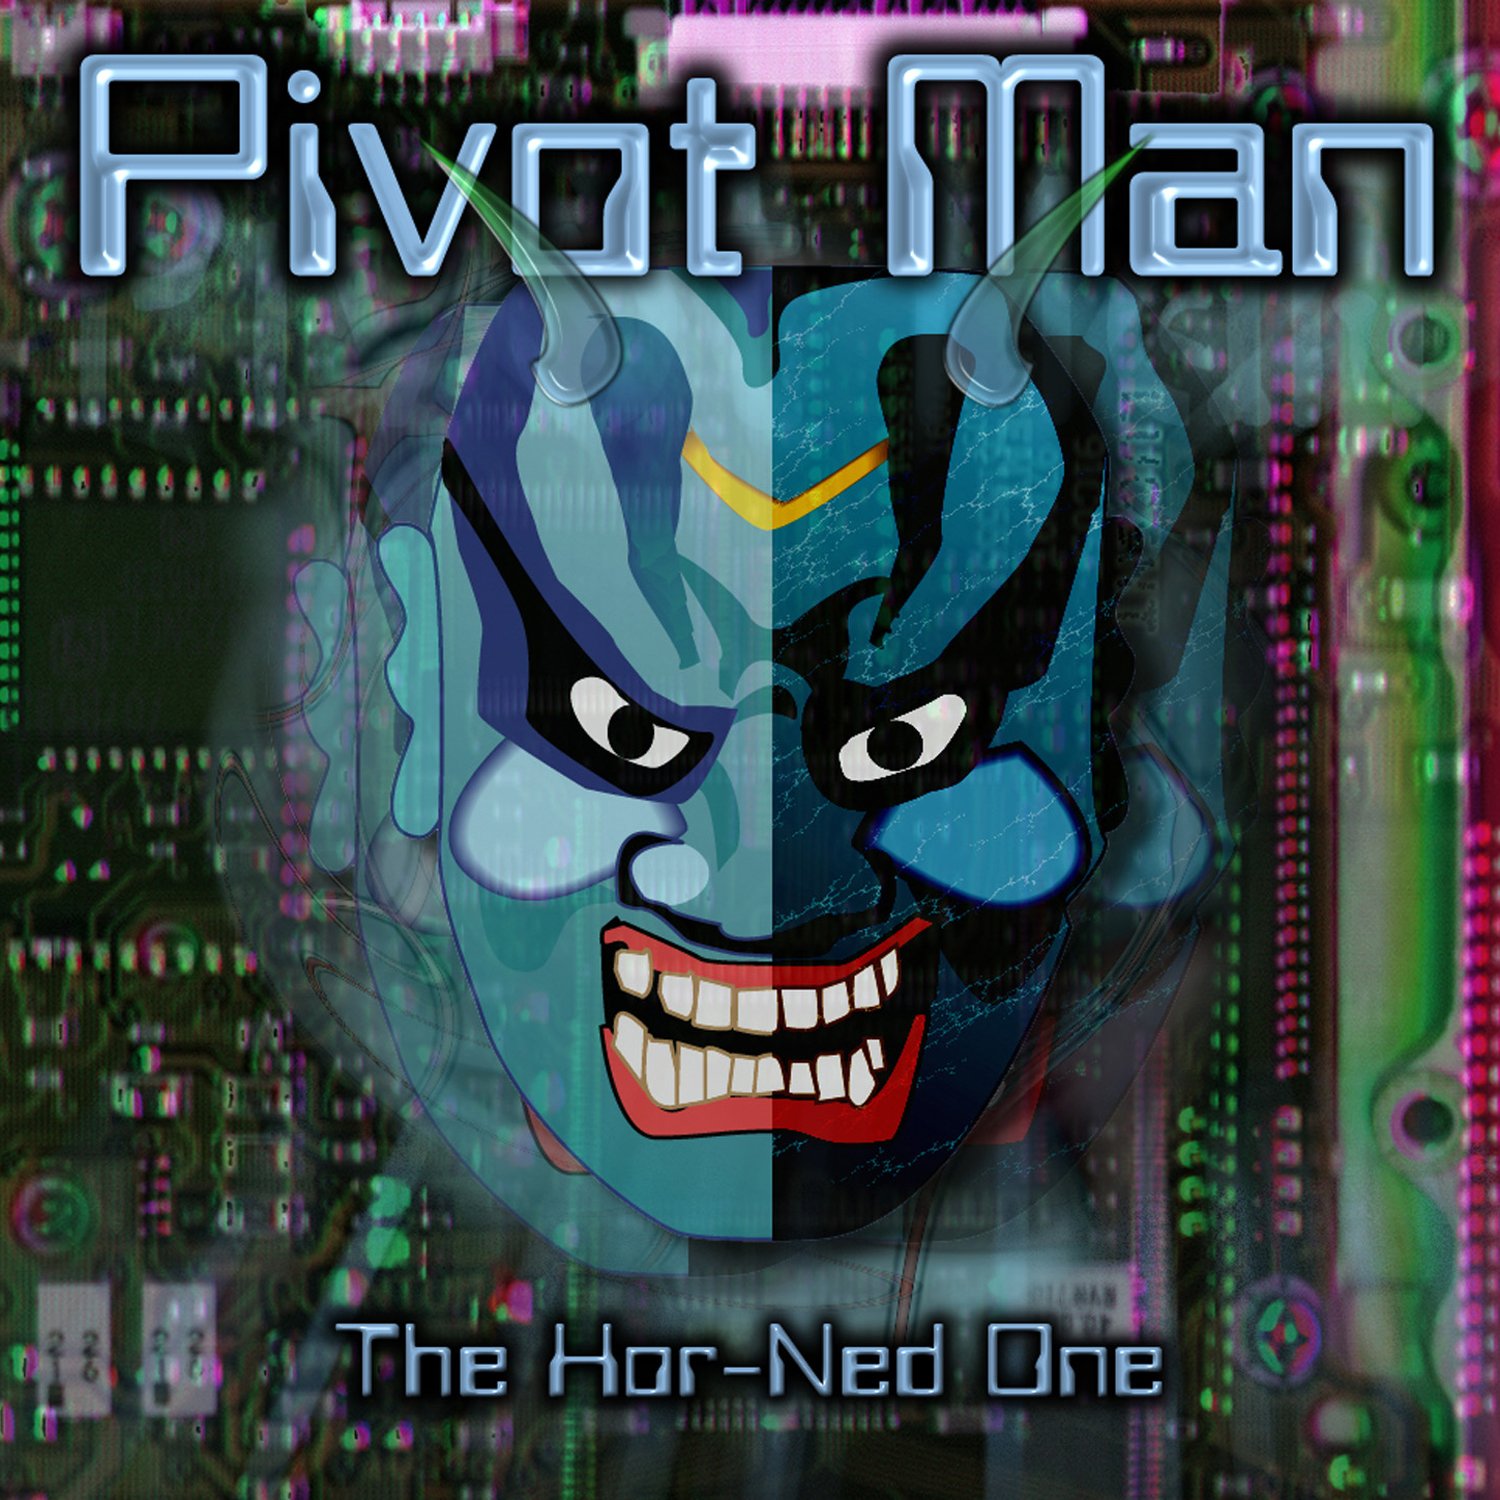 The Hor-Ned One by Pivot Man USB Wristband